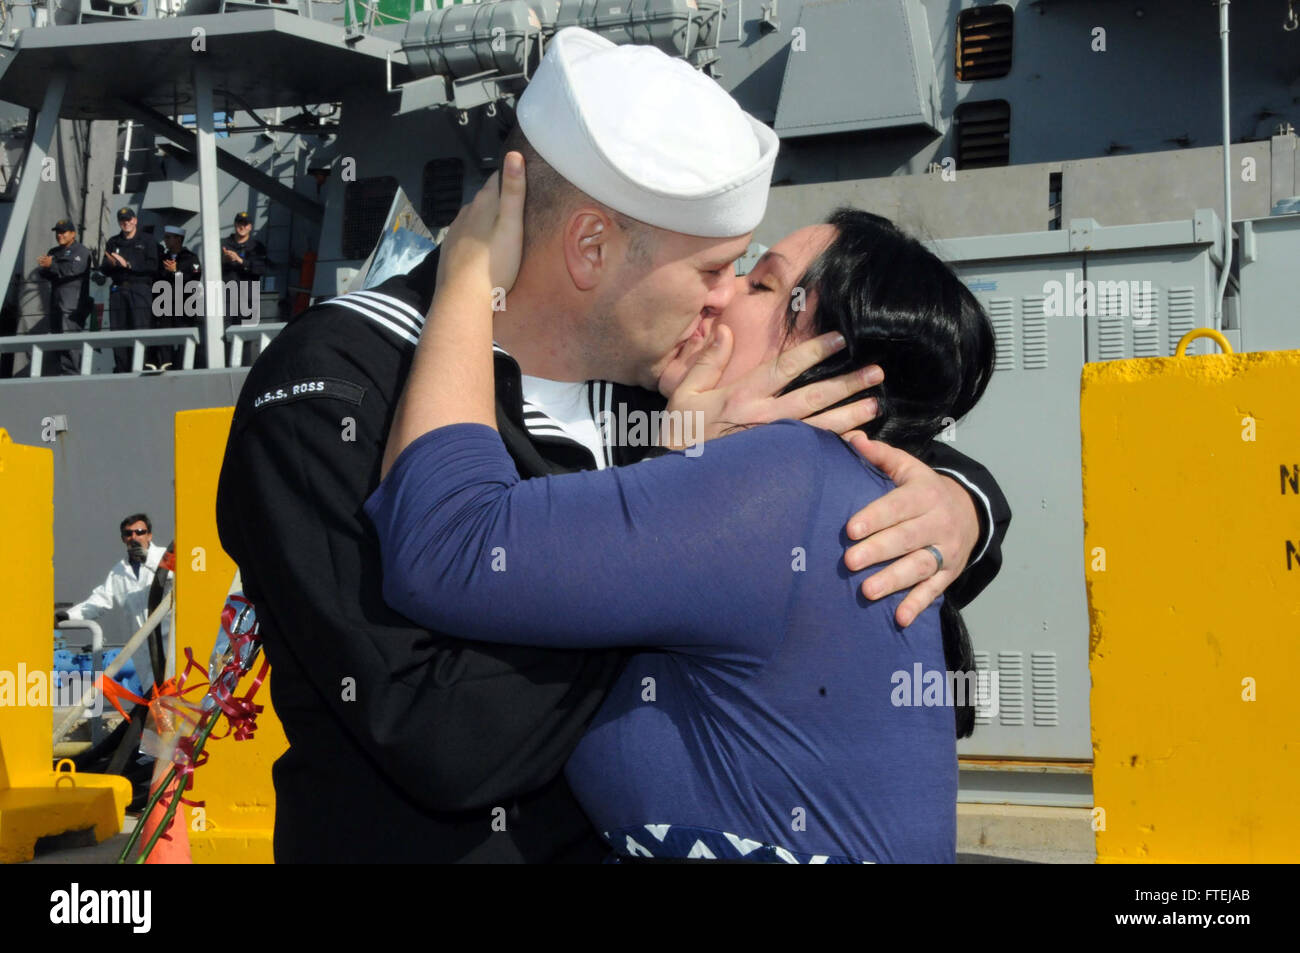 NAVAL STATION ROTA, Spain (Nov. 18, 2014) - Fire Controlman 2nd Class Brian Beddoes, of Harrison, Minnesota, kisses his wife, Kaitlyn, following the ships return to Naval Station Rota after its first patrol since being forward-deployed to Europe. Ross, an Arleigh Burke-class guided missile destroyer forward deployed in Rota Spain, returned from conducting naval operations in the U.S. 6th Fleet area of operations in support of U.S. national security interests in Europe. Stock Photo